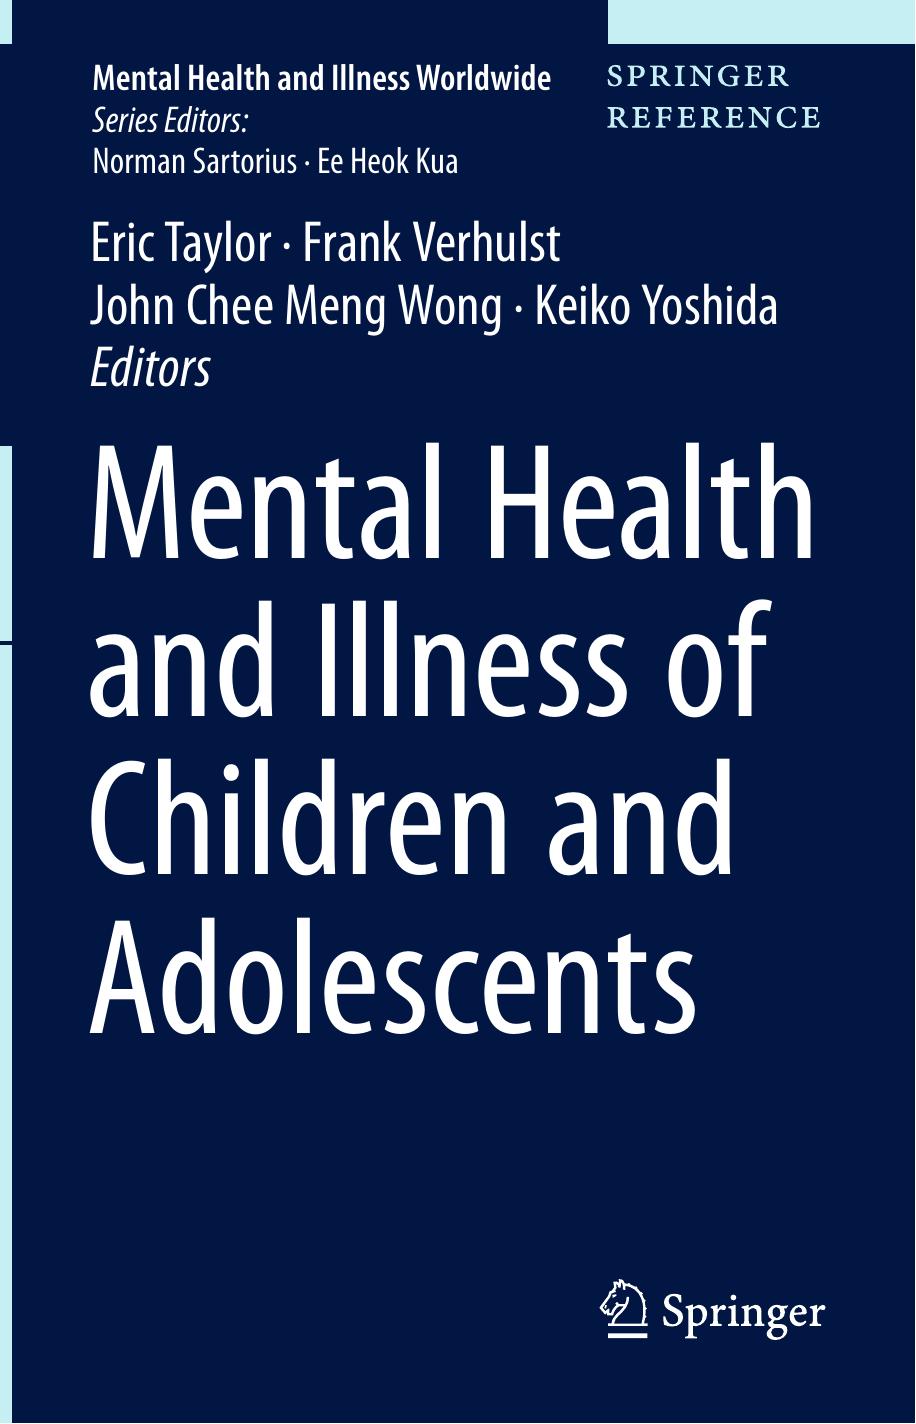 Mental Health and Illness of Children and Adolescents (2021)